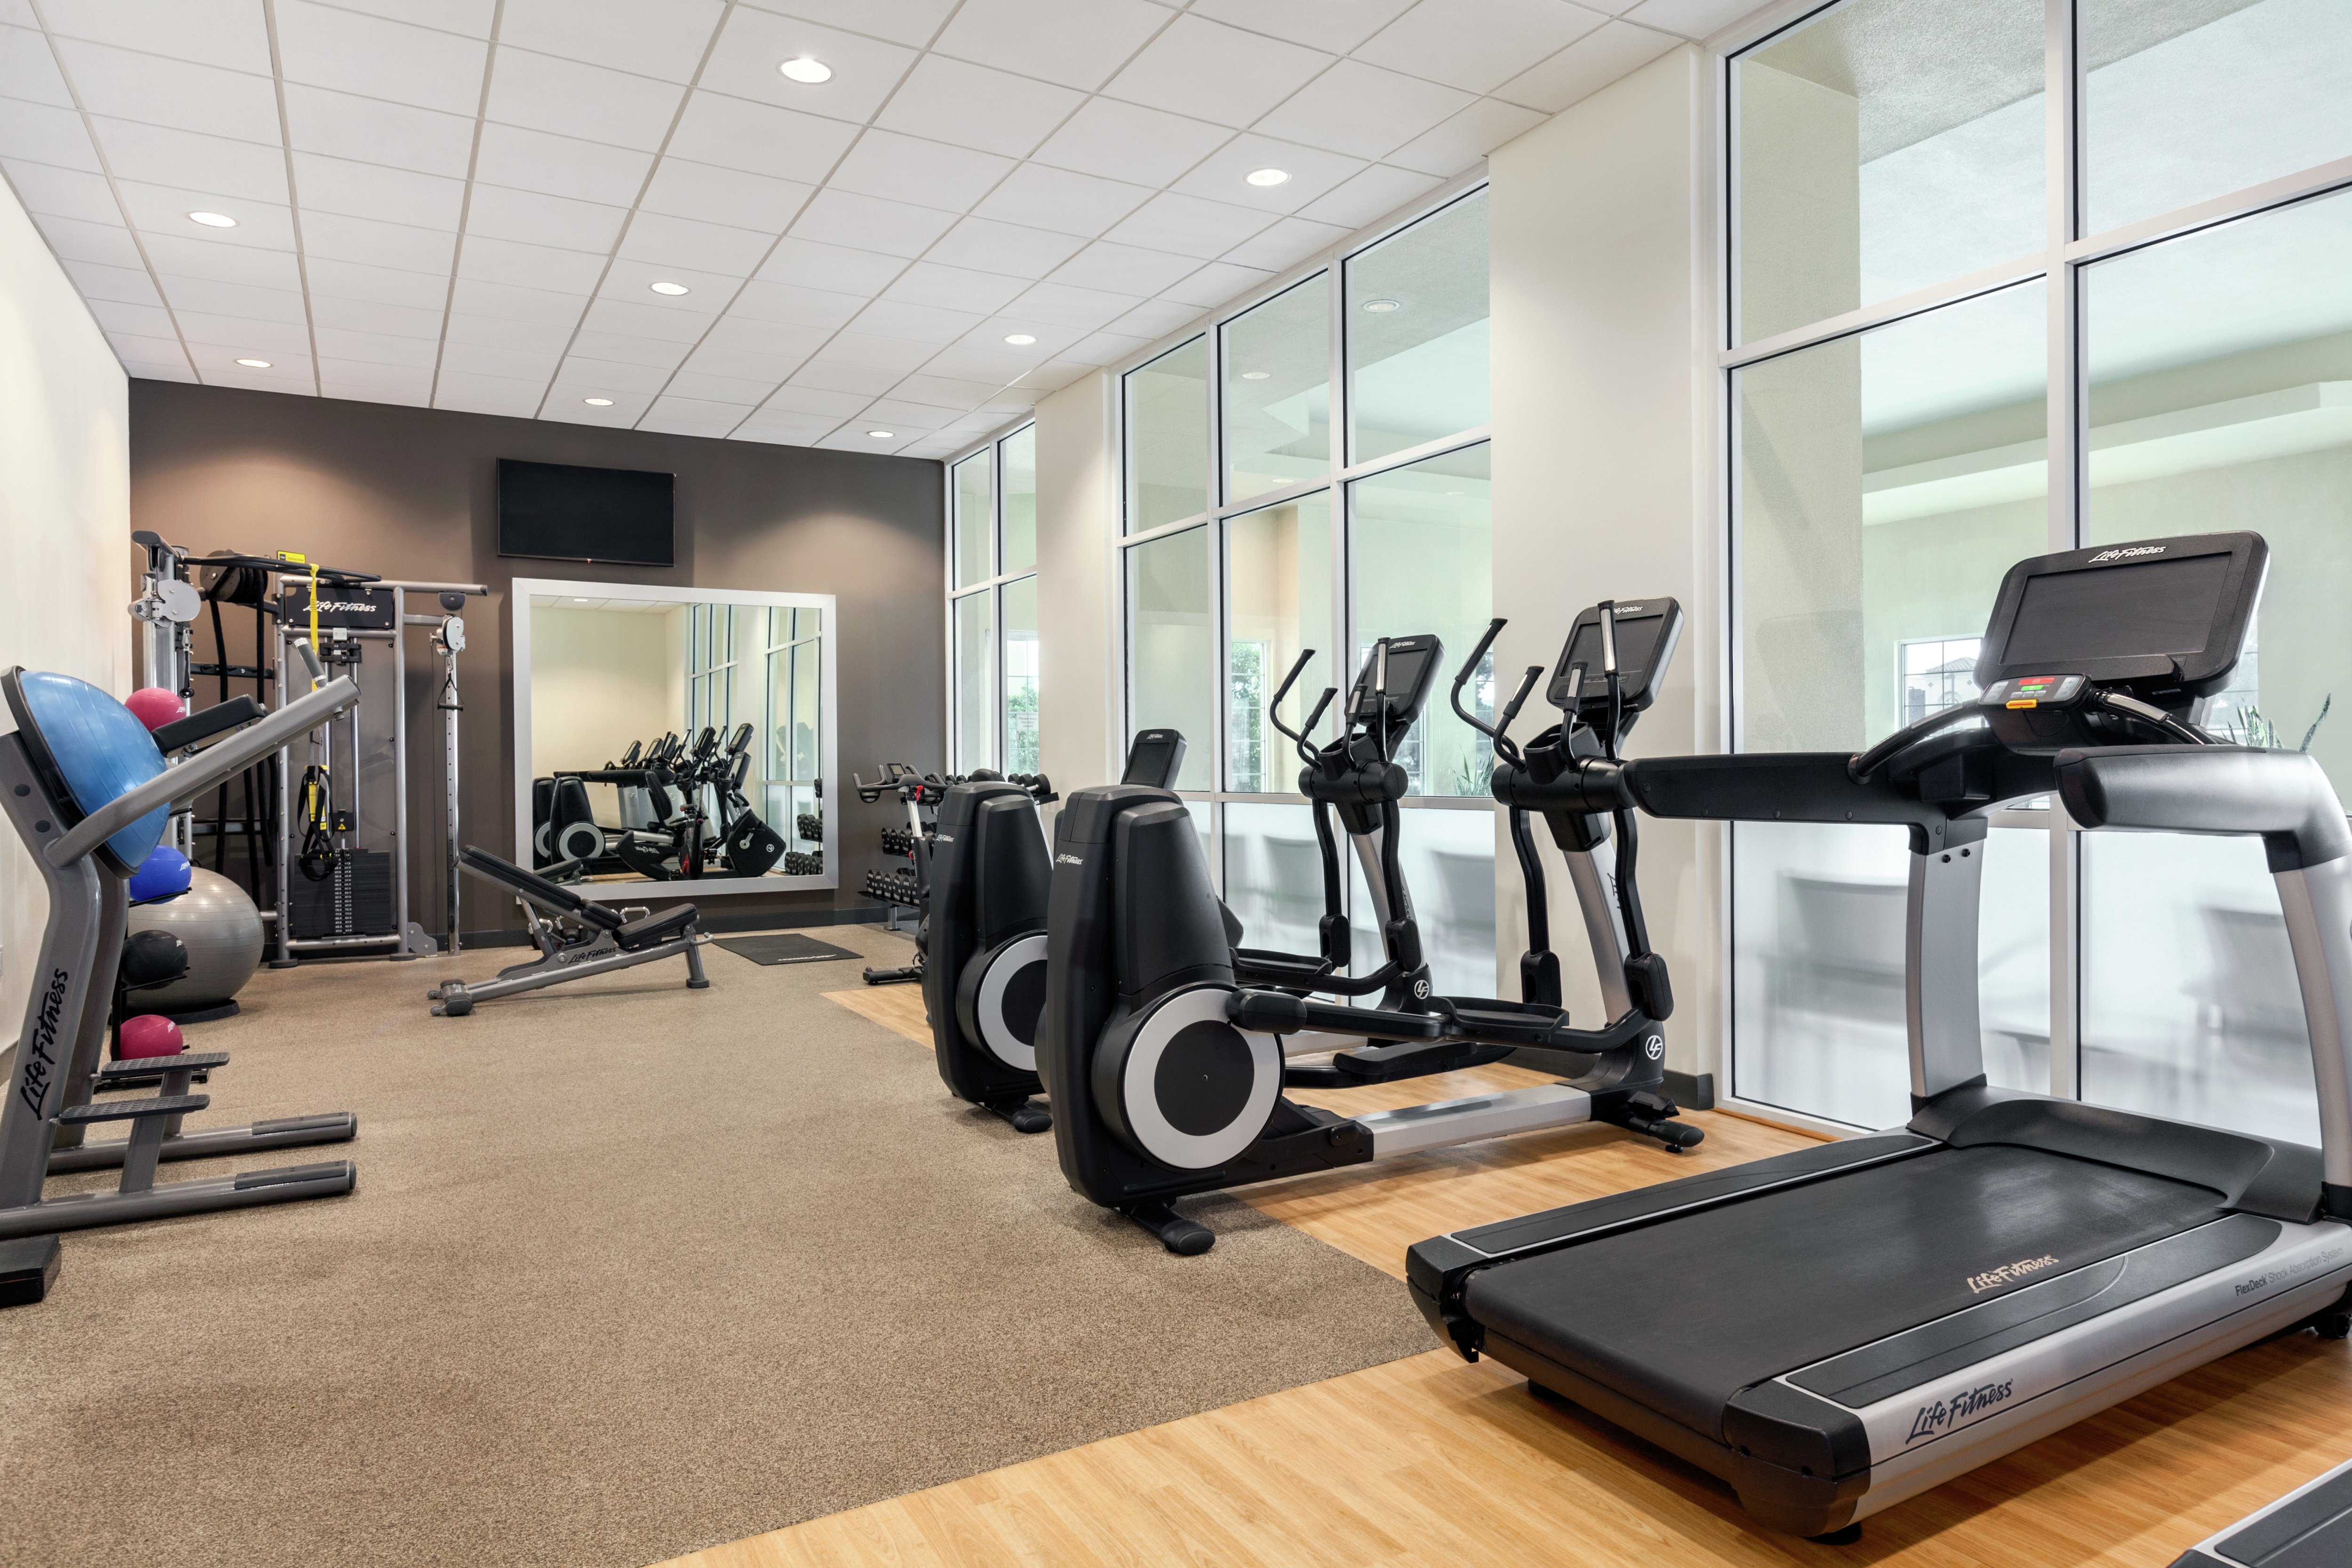 Bright on-site fitness center fully equipped with cardio machines, free weights, and resistance training equipment.